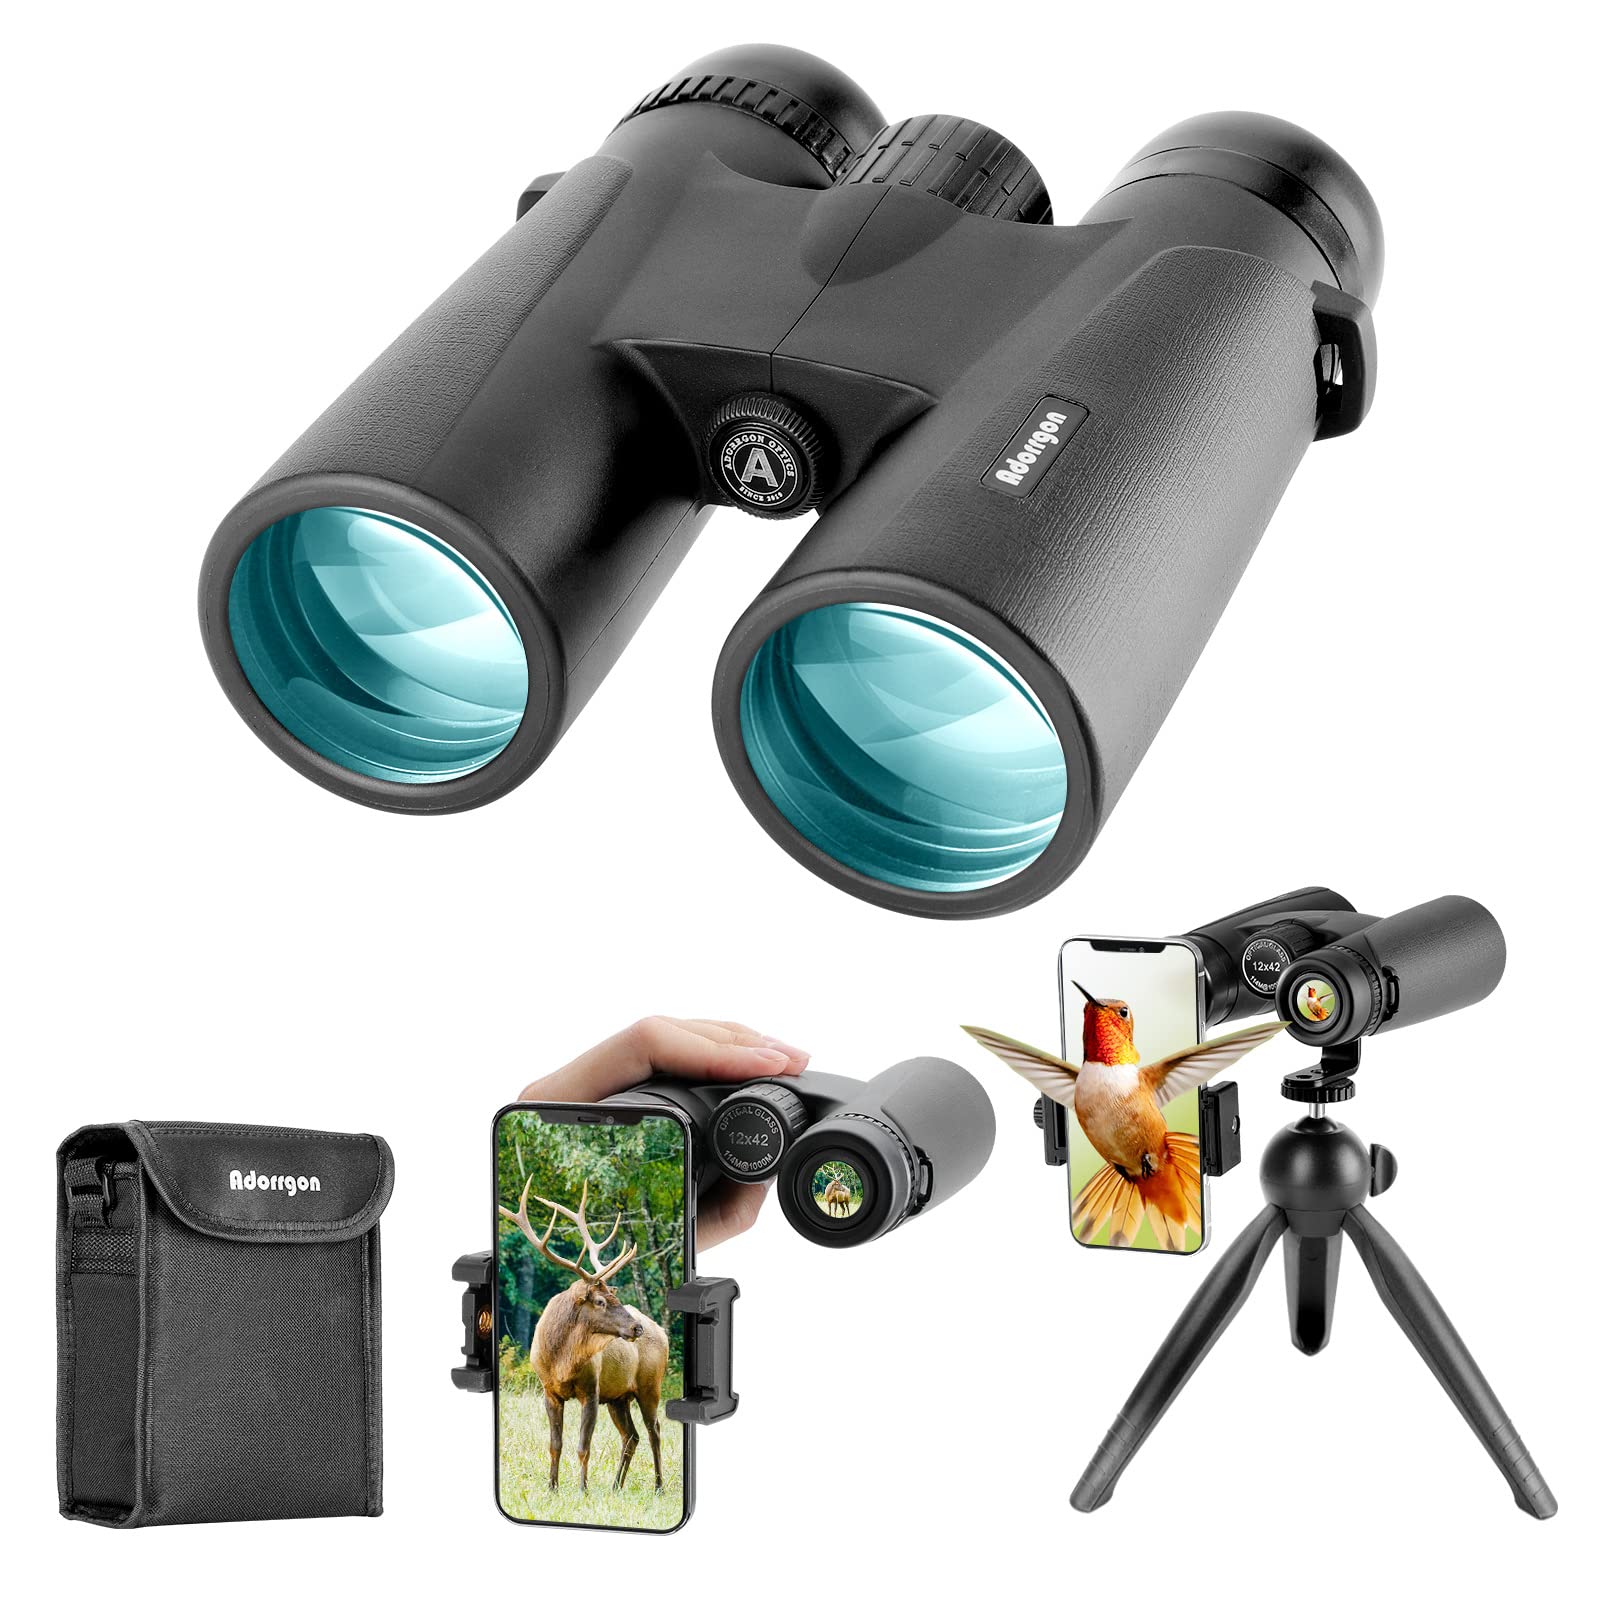 Adorrgon 12x42 HD Binoculars for Adults High Powered with Phone Adapter, Tripod and Tripod Adapter - Large View Binoculars with Clear Low Light Vision - Binoculars for Bird Watching Cruise Ship Travel